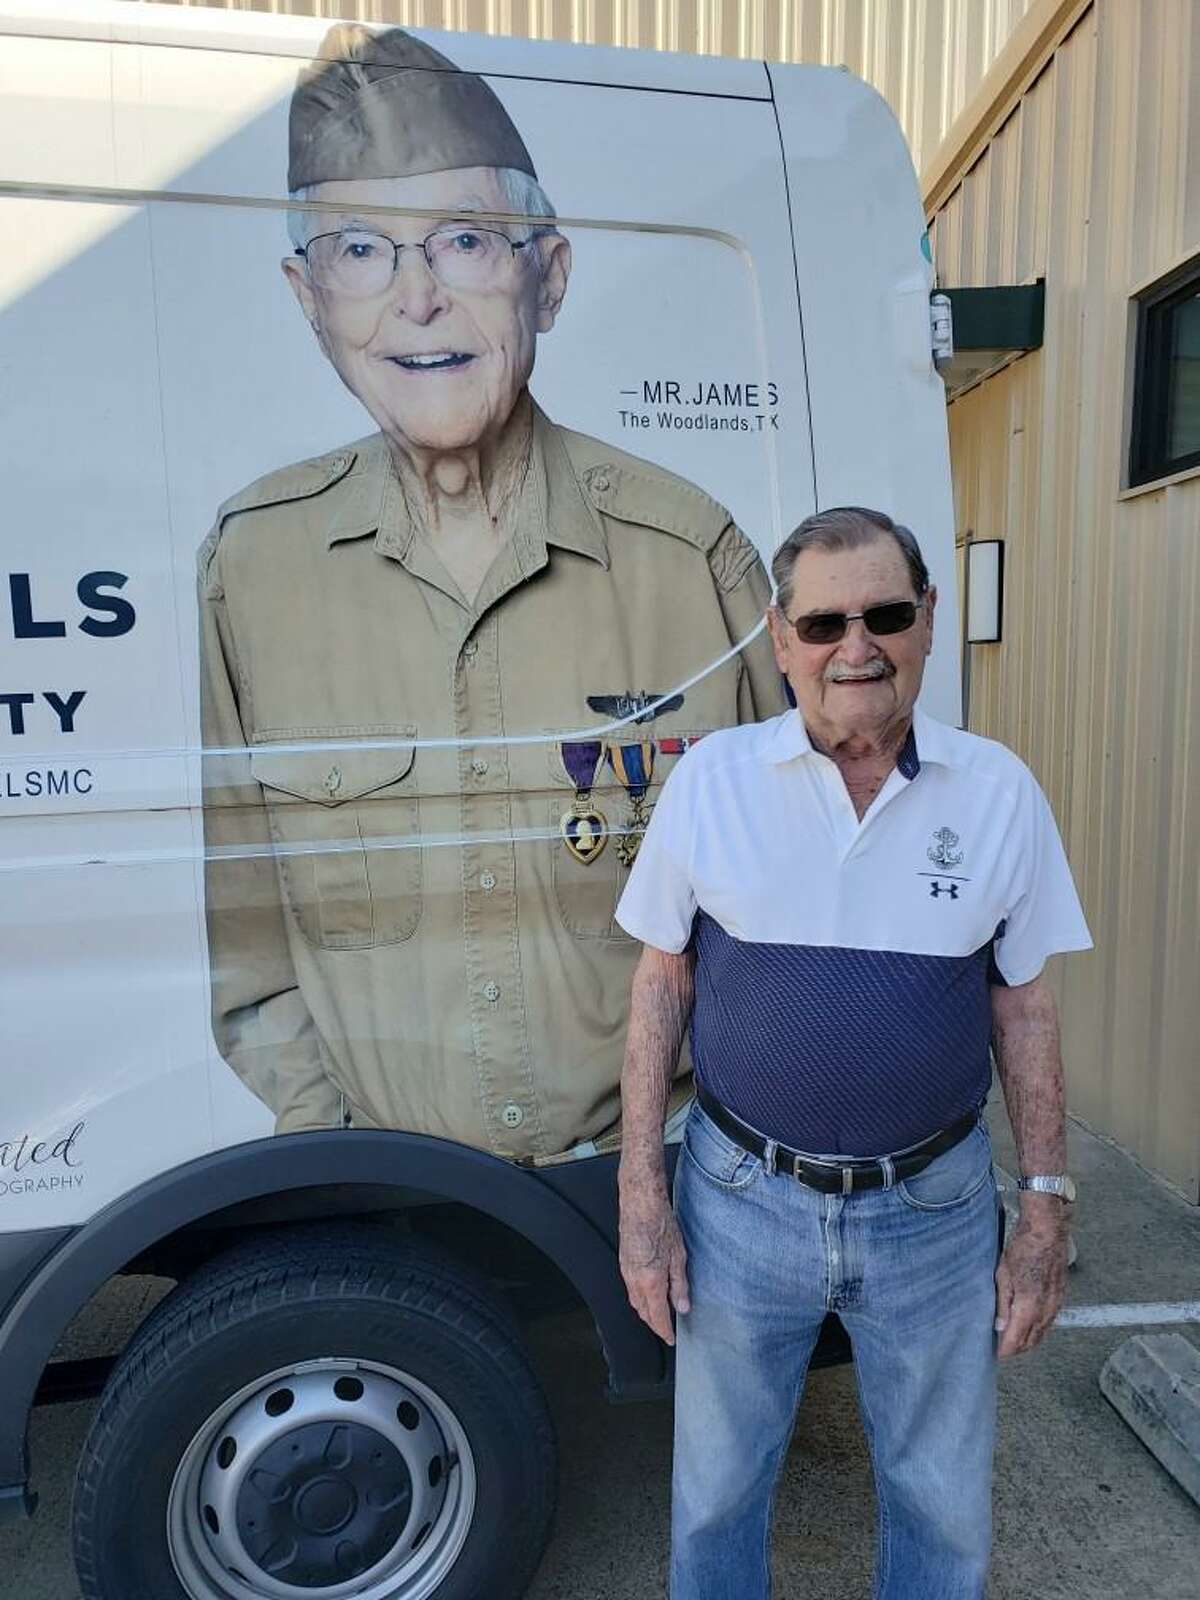 Charles Reed has been a meal delivery volunteer for 35 years for MOWMC. He is 91 years old and hung up his hat May 26 participating in his last delivery. He has a special place in his heart for bringing smiles to seniors and talks with the homebound seniors MOW serves.